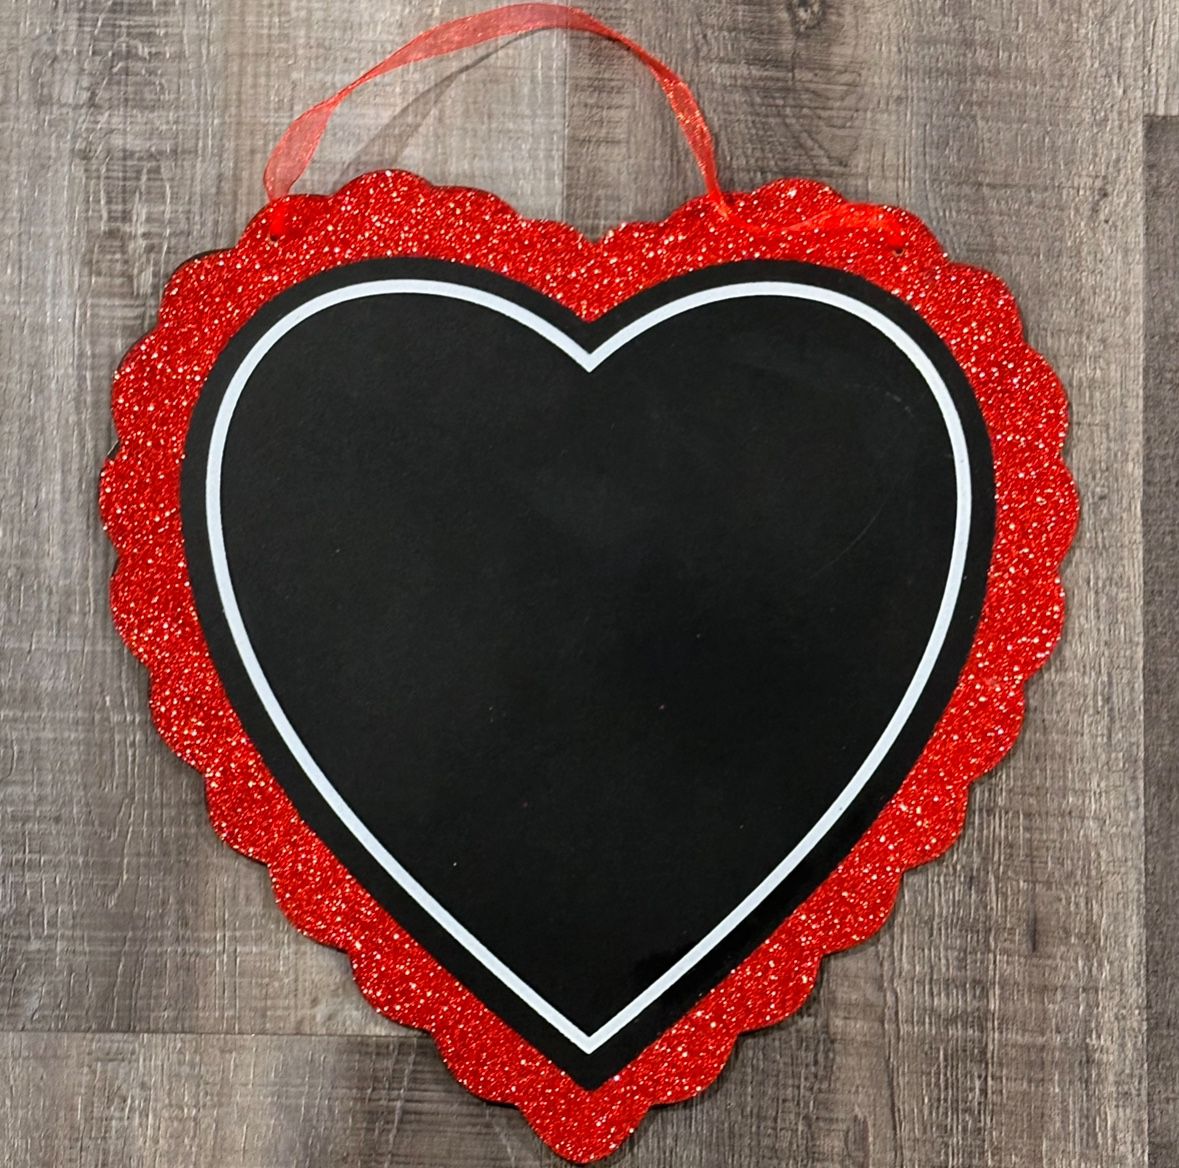 Hanging Heart-Shaped Chalkboard With Glitter Trim